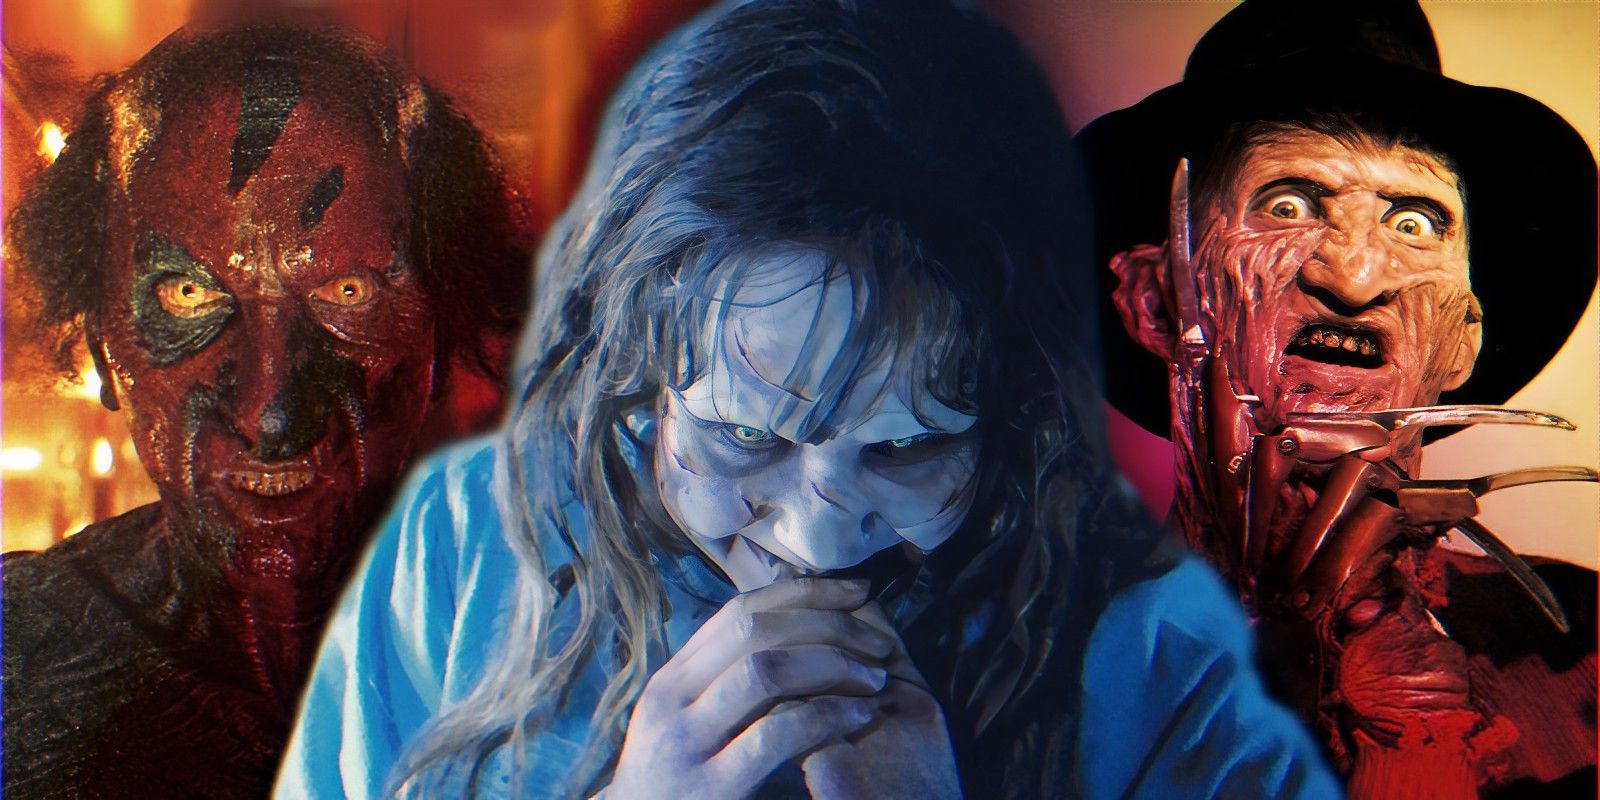 Insidious’s Lipstick Face and Freddy Krueger snarling alongside The Exorcist’s Regan smiling shyly.